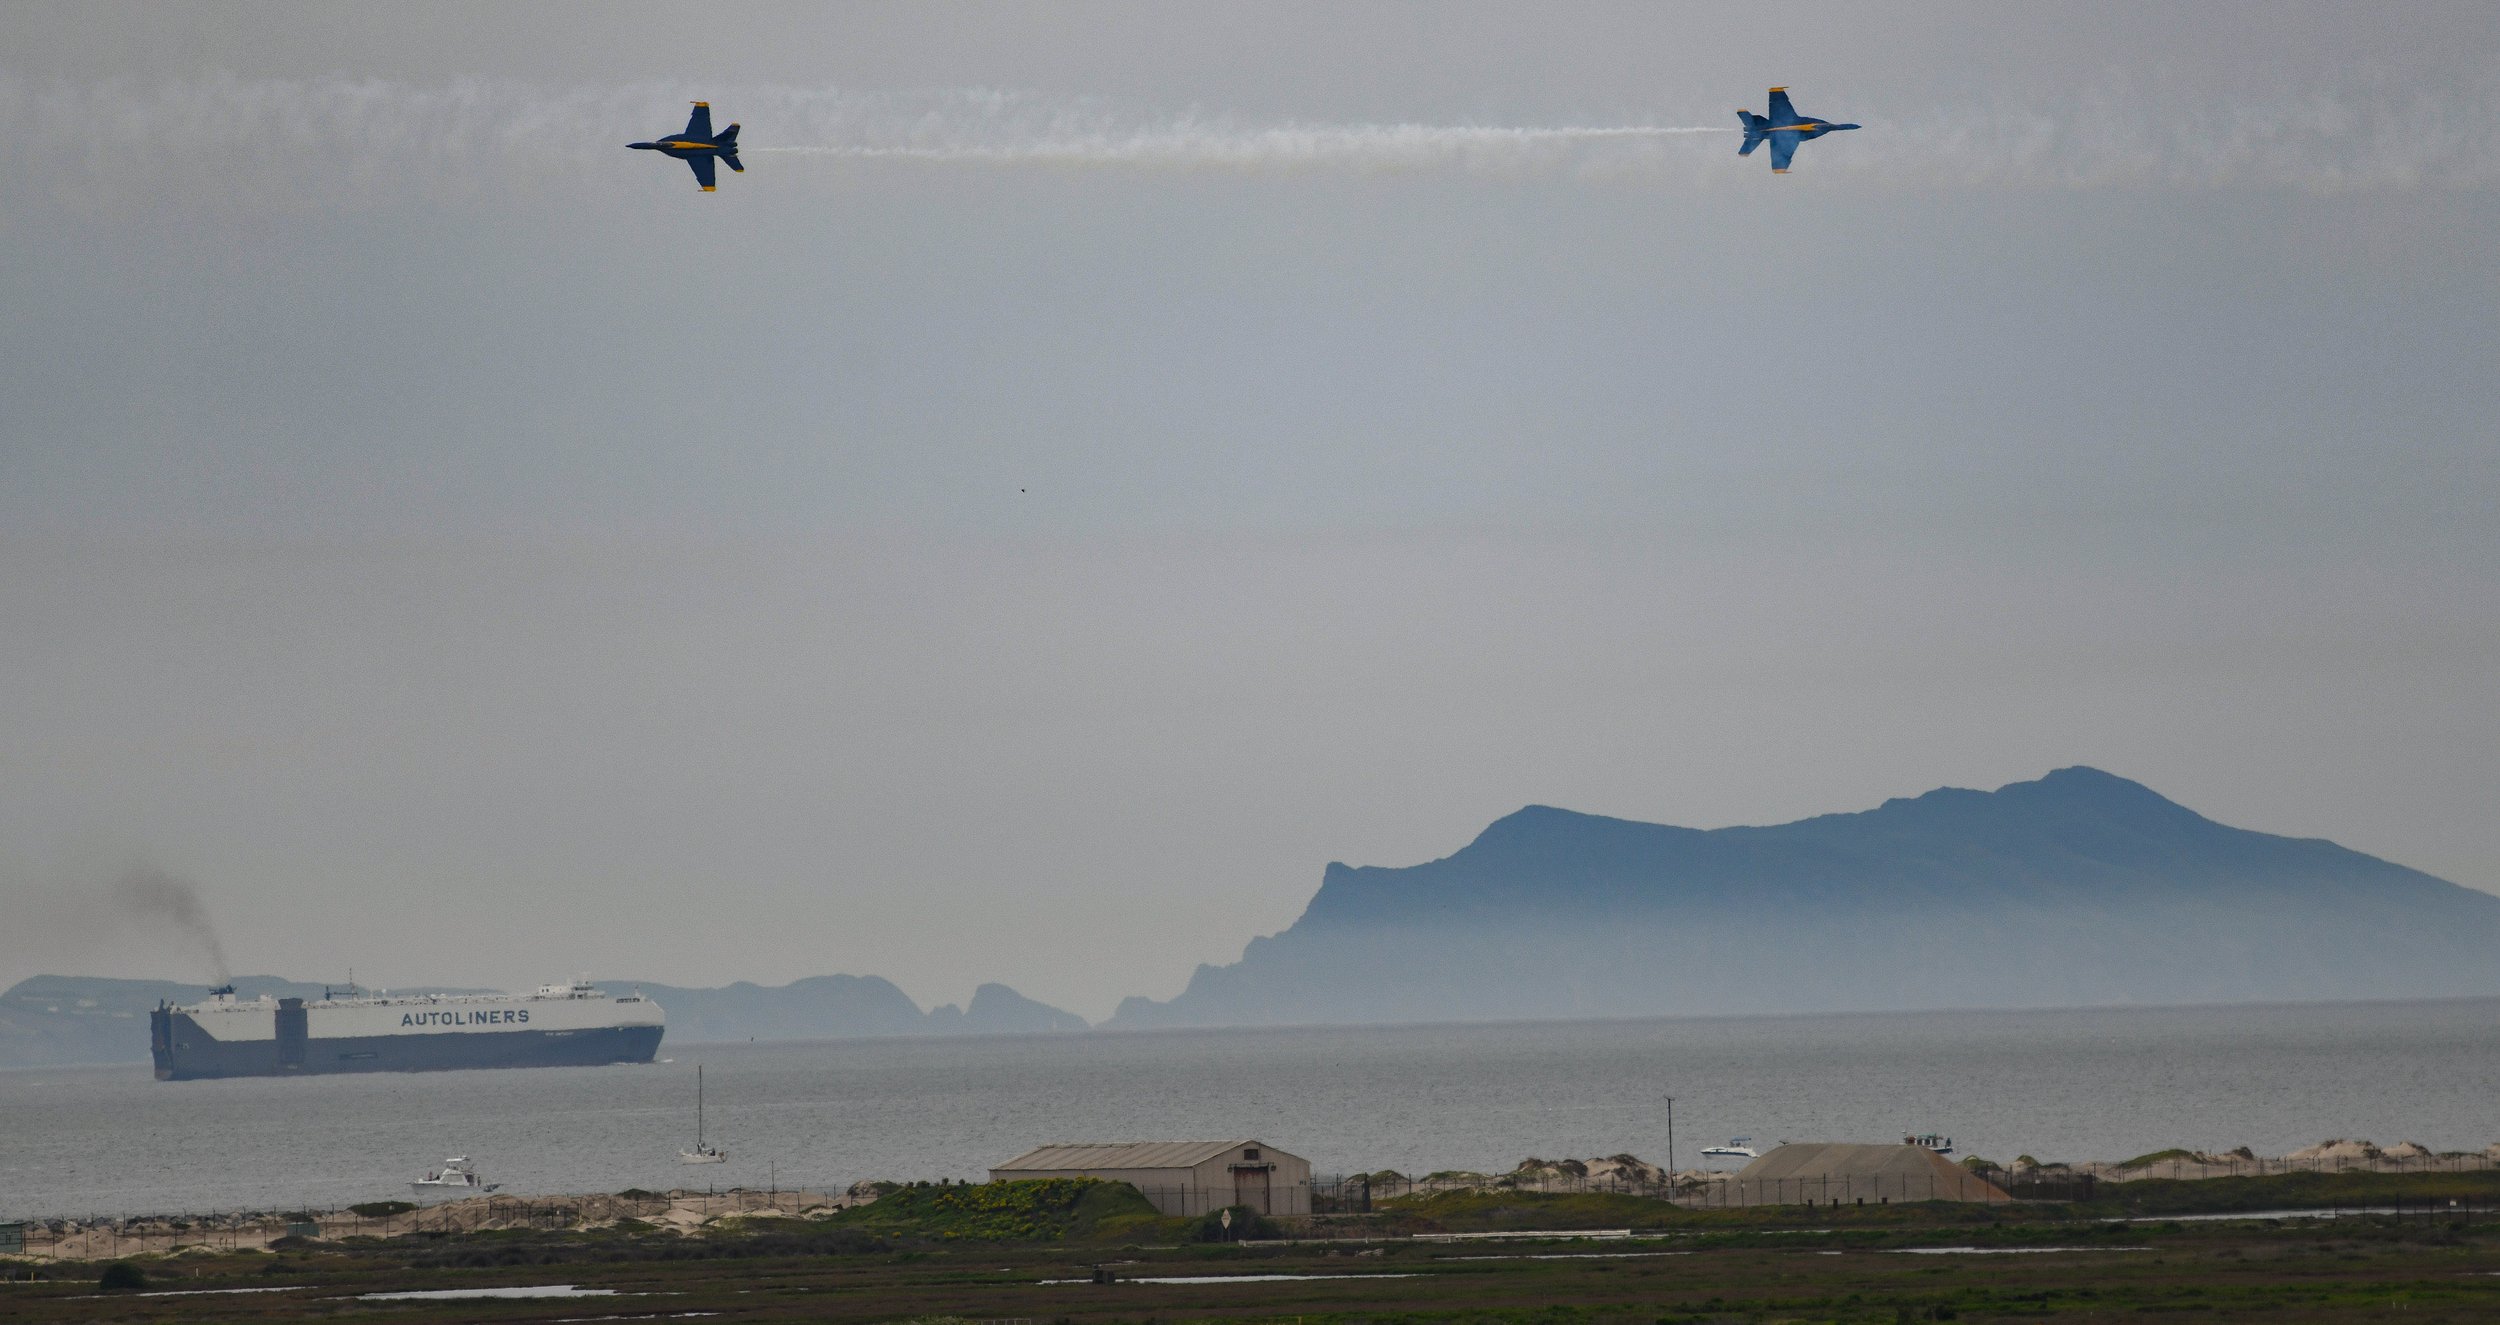  U.S. Navy Flight Demonstration Squadron, the Blue Angels, during an opposing solo pass over Anacapa Island at the 2023 Point Mugu Air Show.  The Blue Angels were the headliner for the Air Show that ran March 17-19 at Naval Base Ventura County in Cal